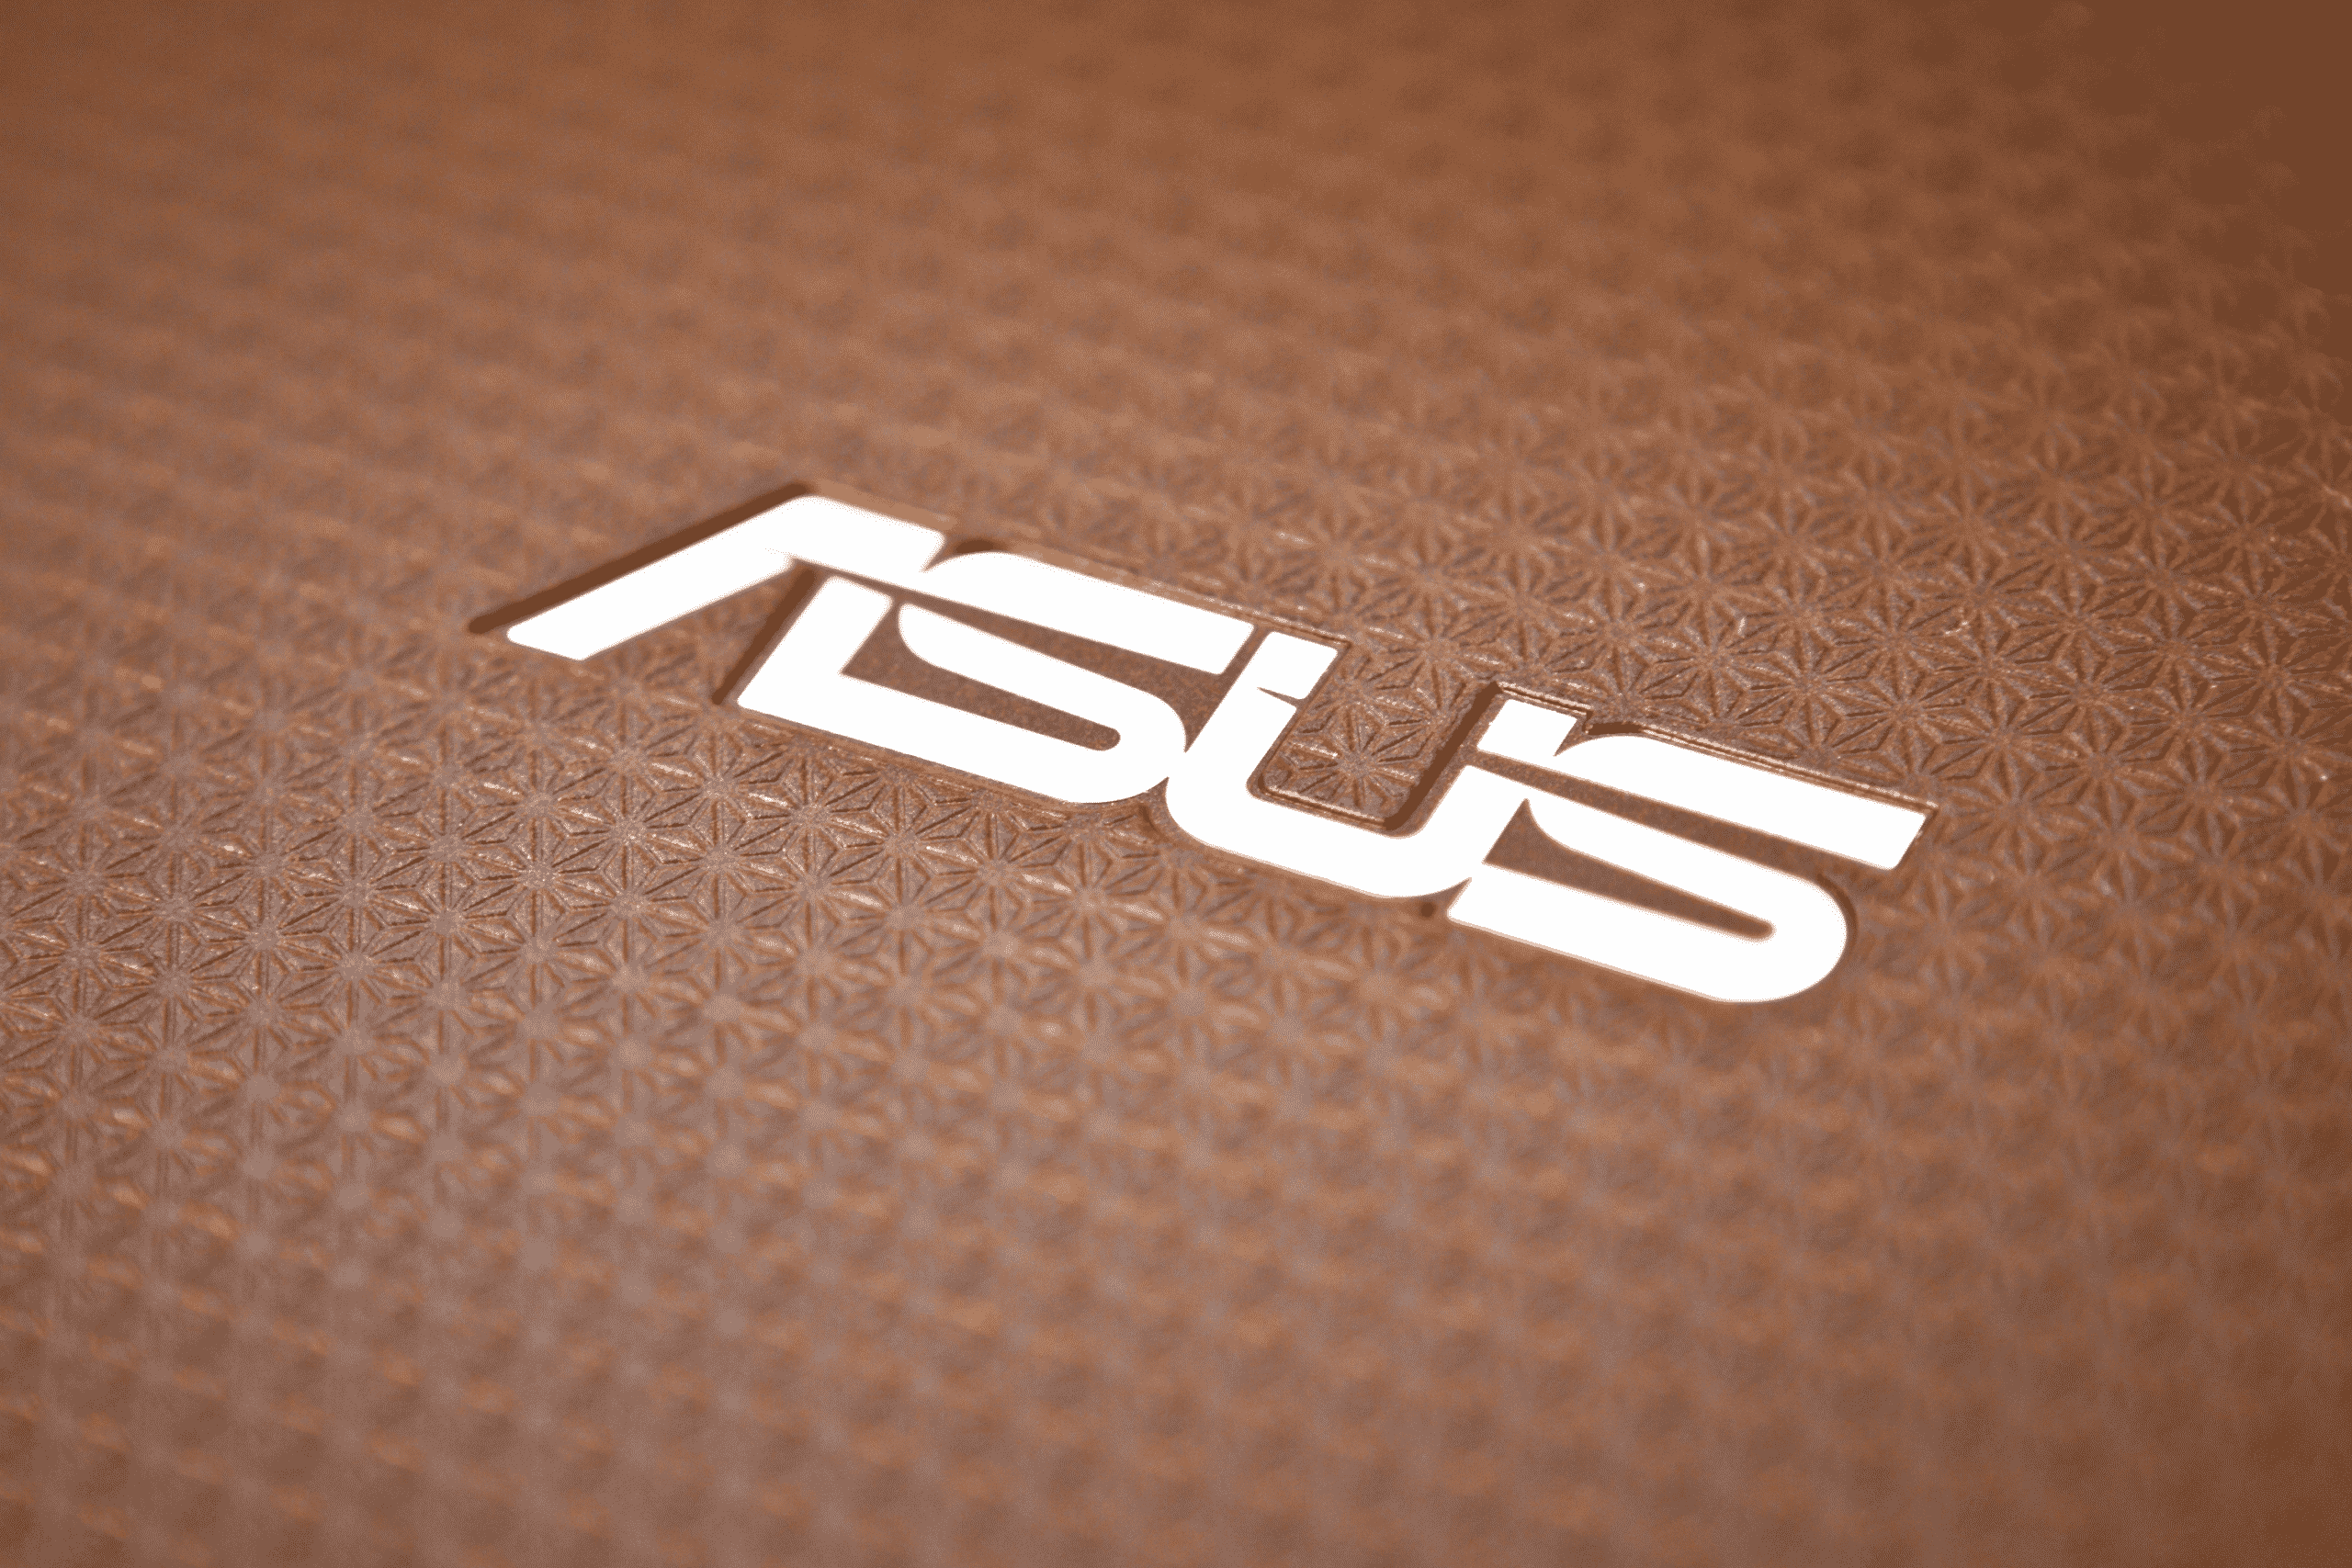 Cyclops Blink Botnet Targets ASUS Routers and WatchGuard Devices